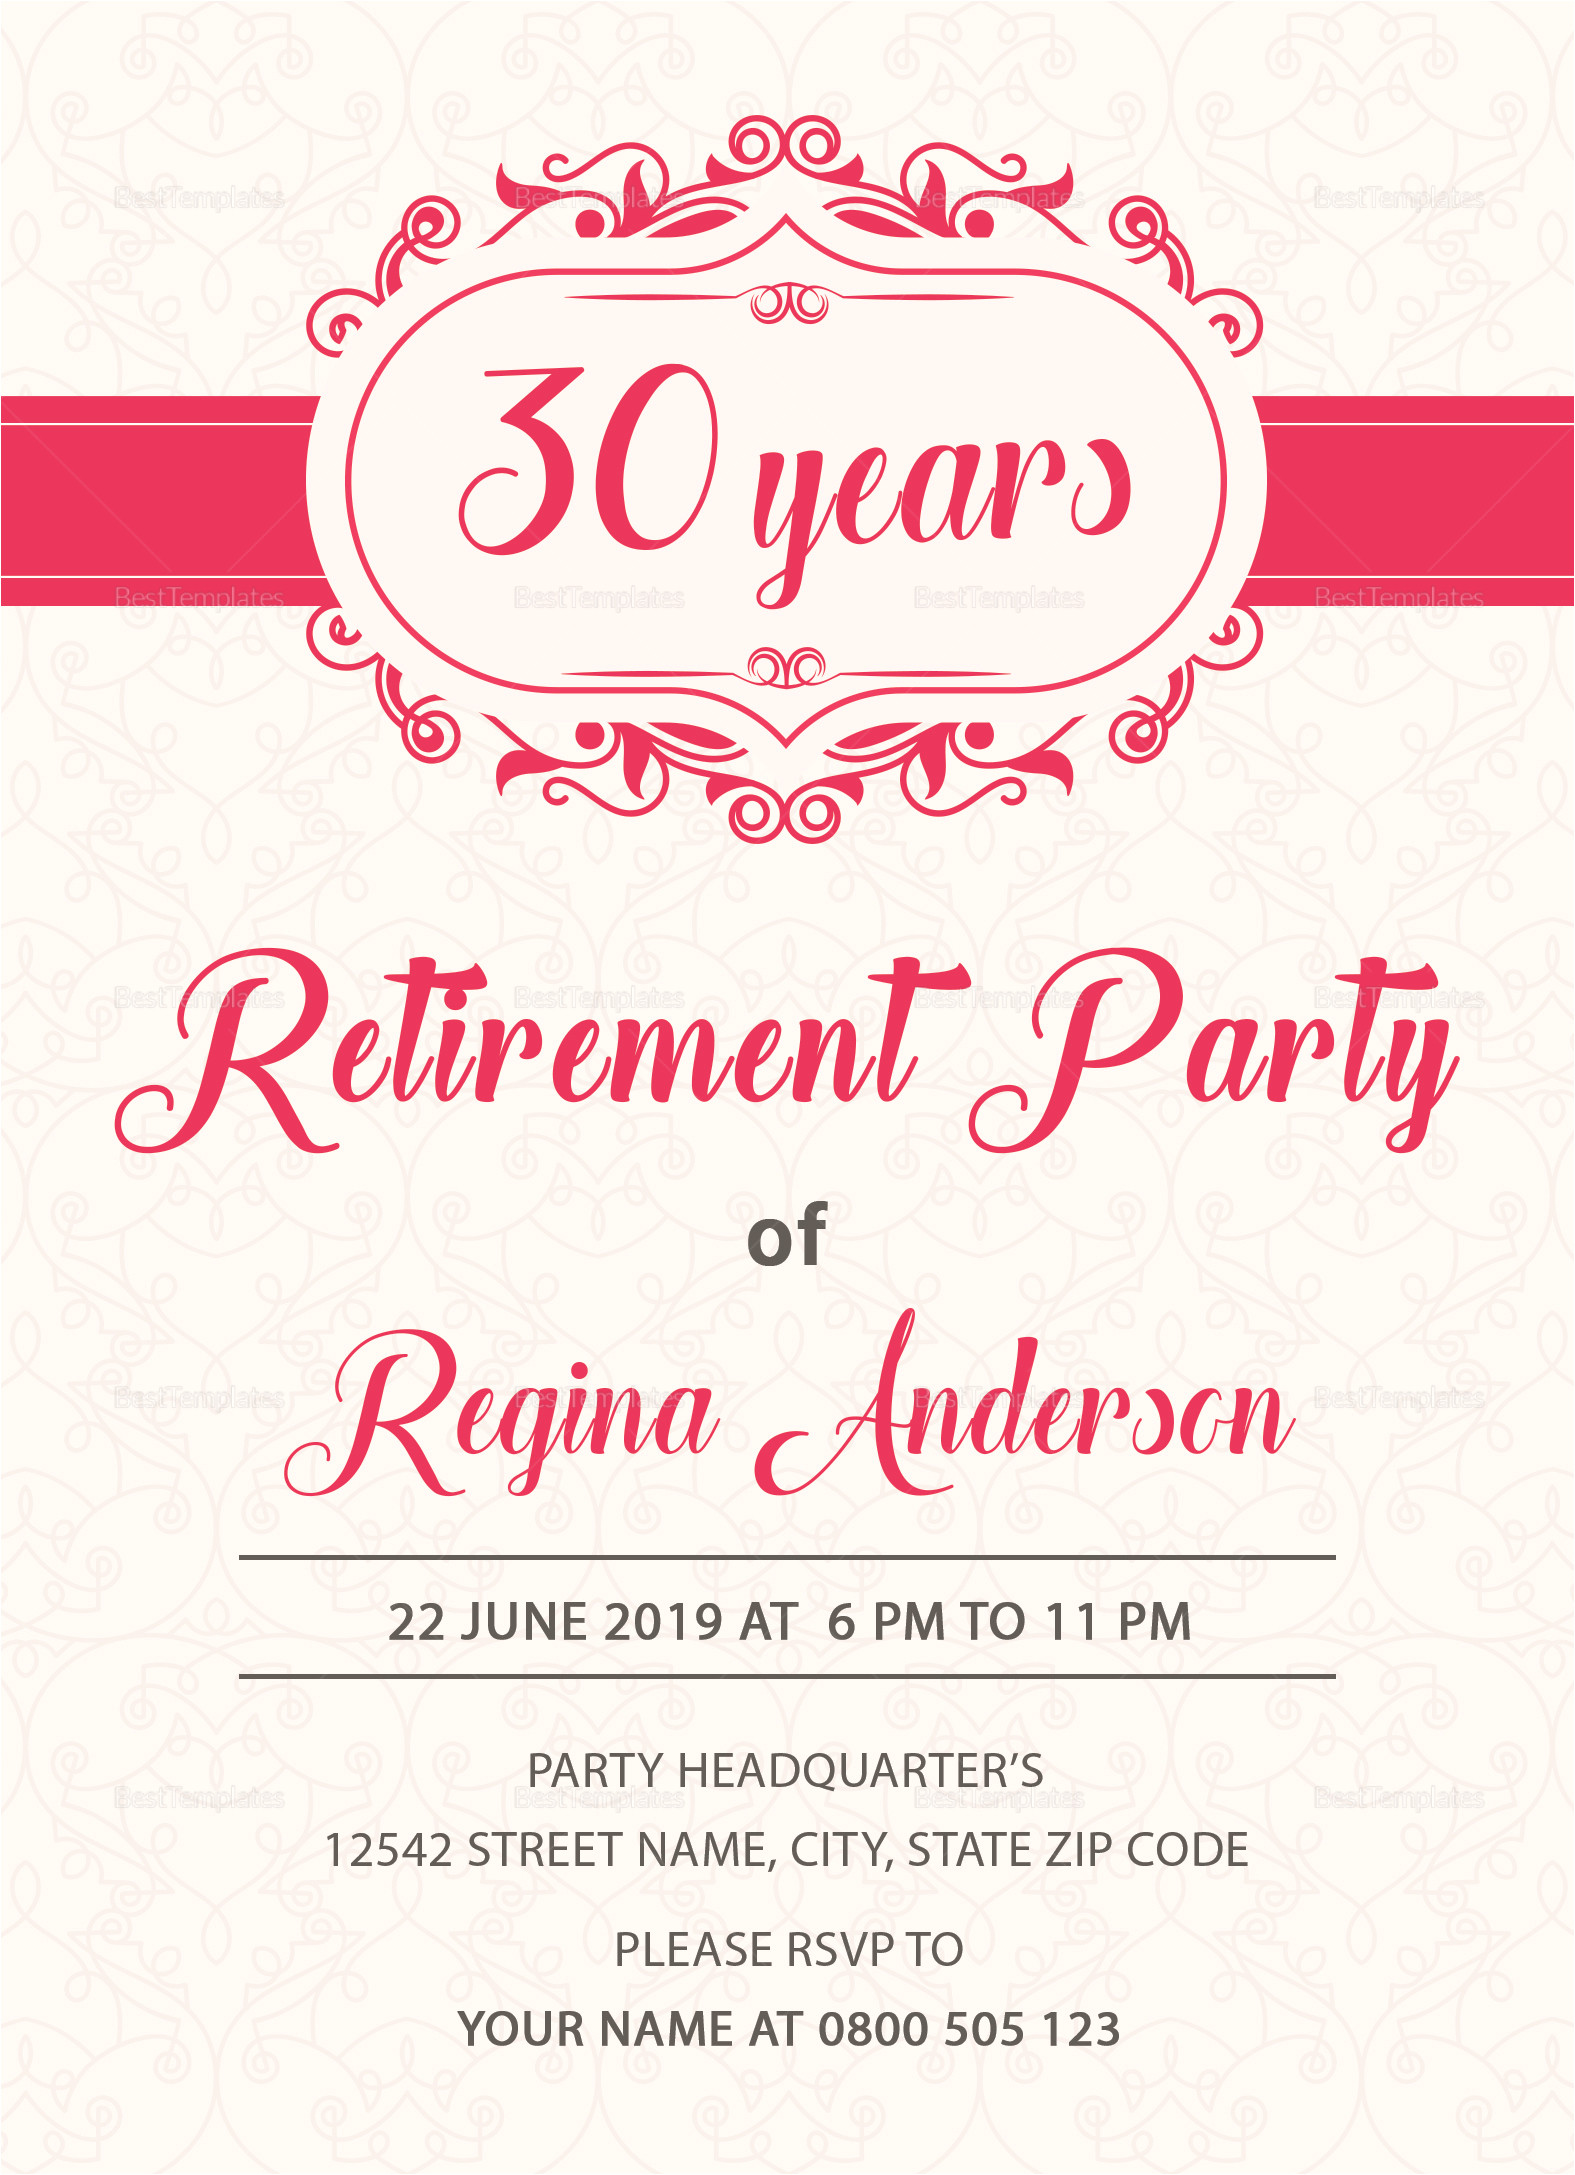 Retirement Party Invitation Letter Template Sample Retirement Party Invitation Design Template In Psd